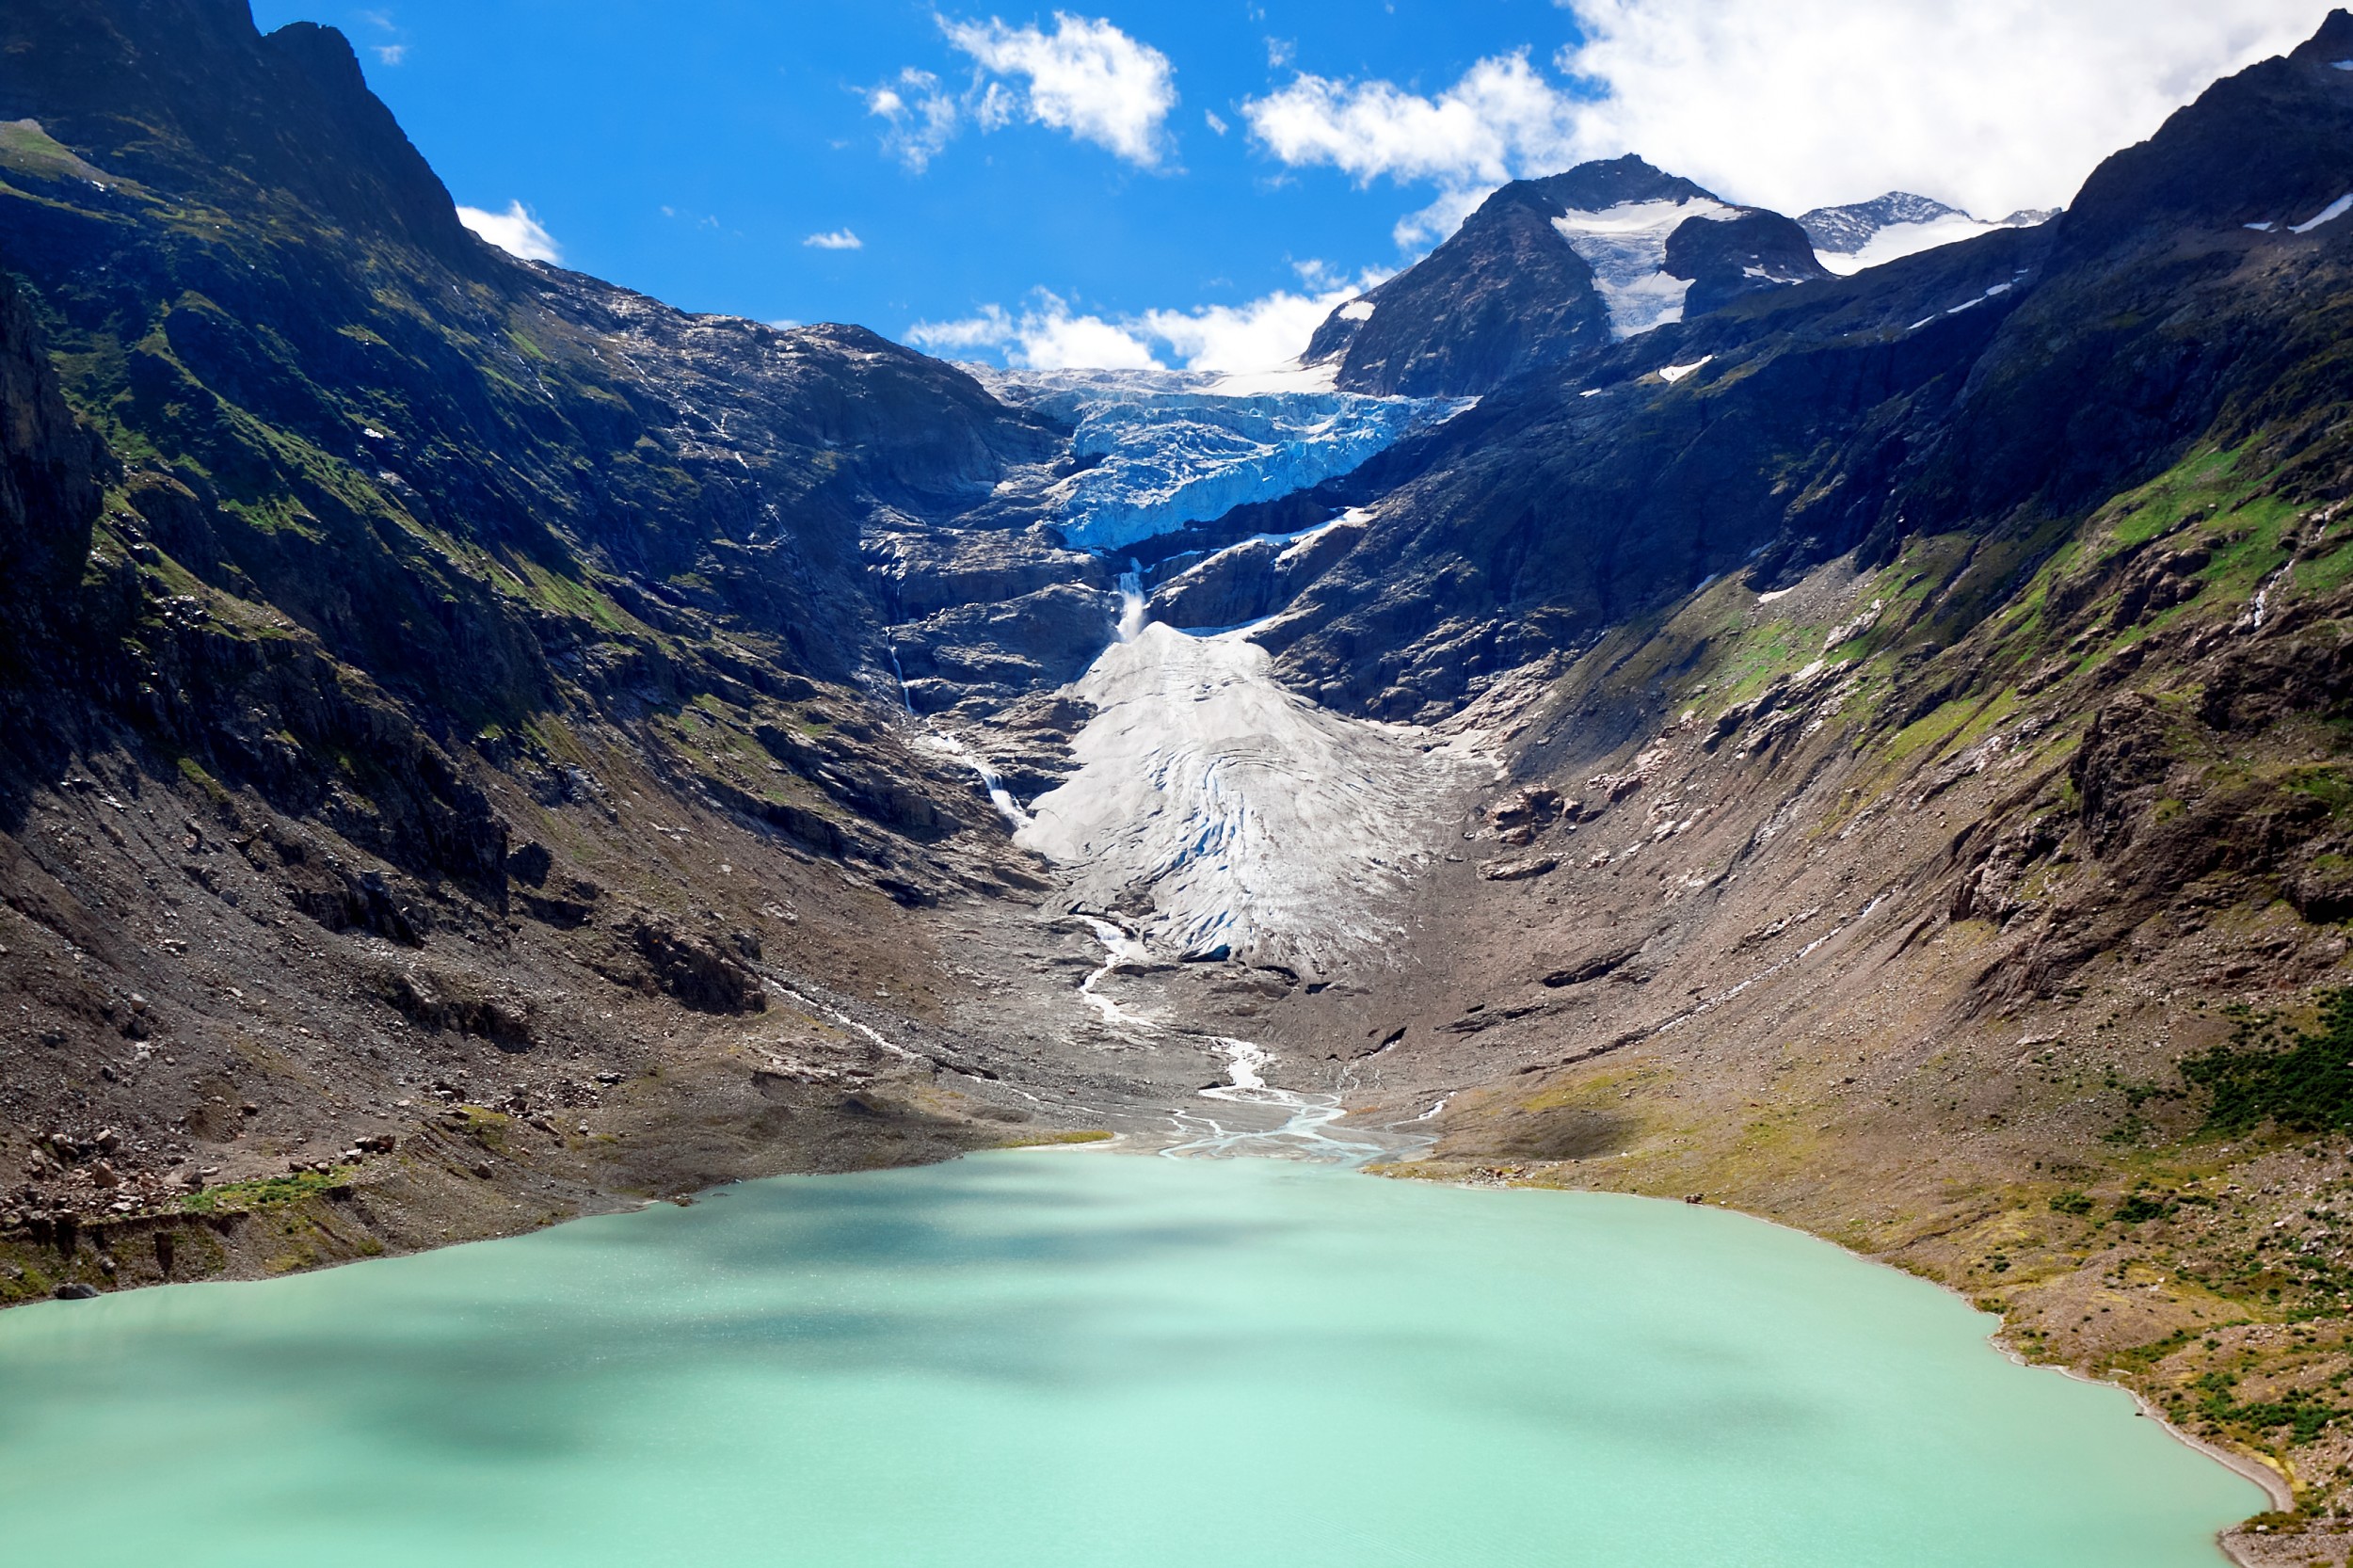 Beneath the melting Trift Glacier, there is potential for a new hydropower plant – a dam is therefore being planned at this site.